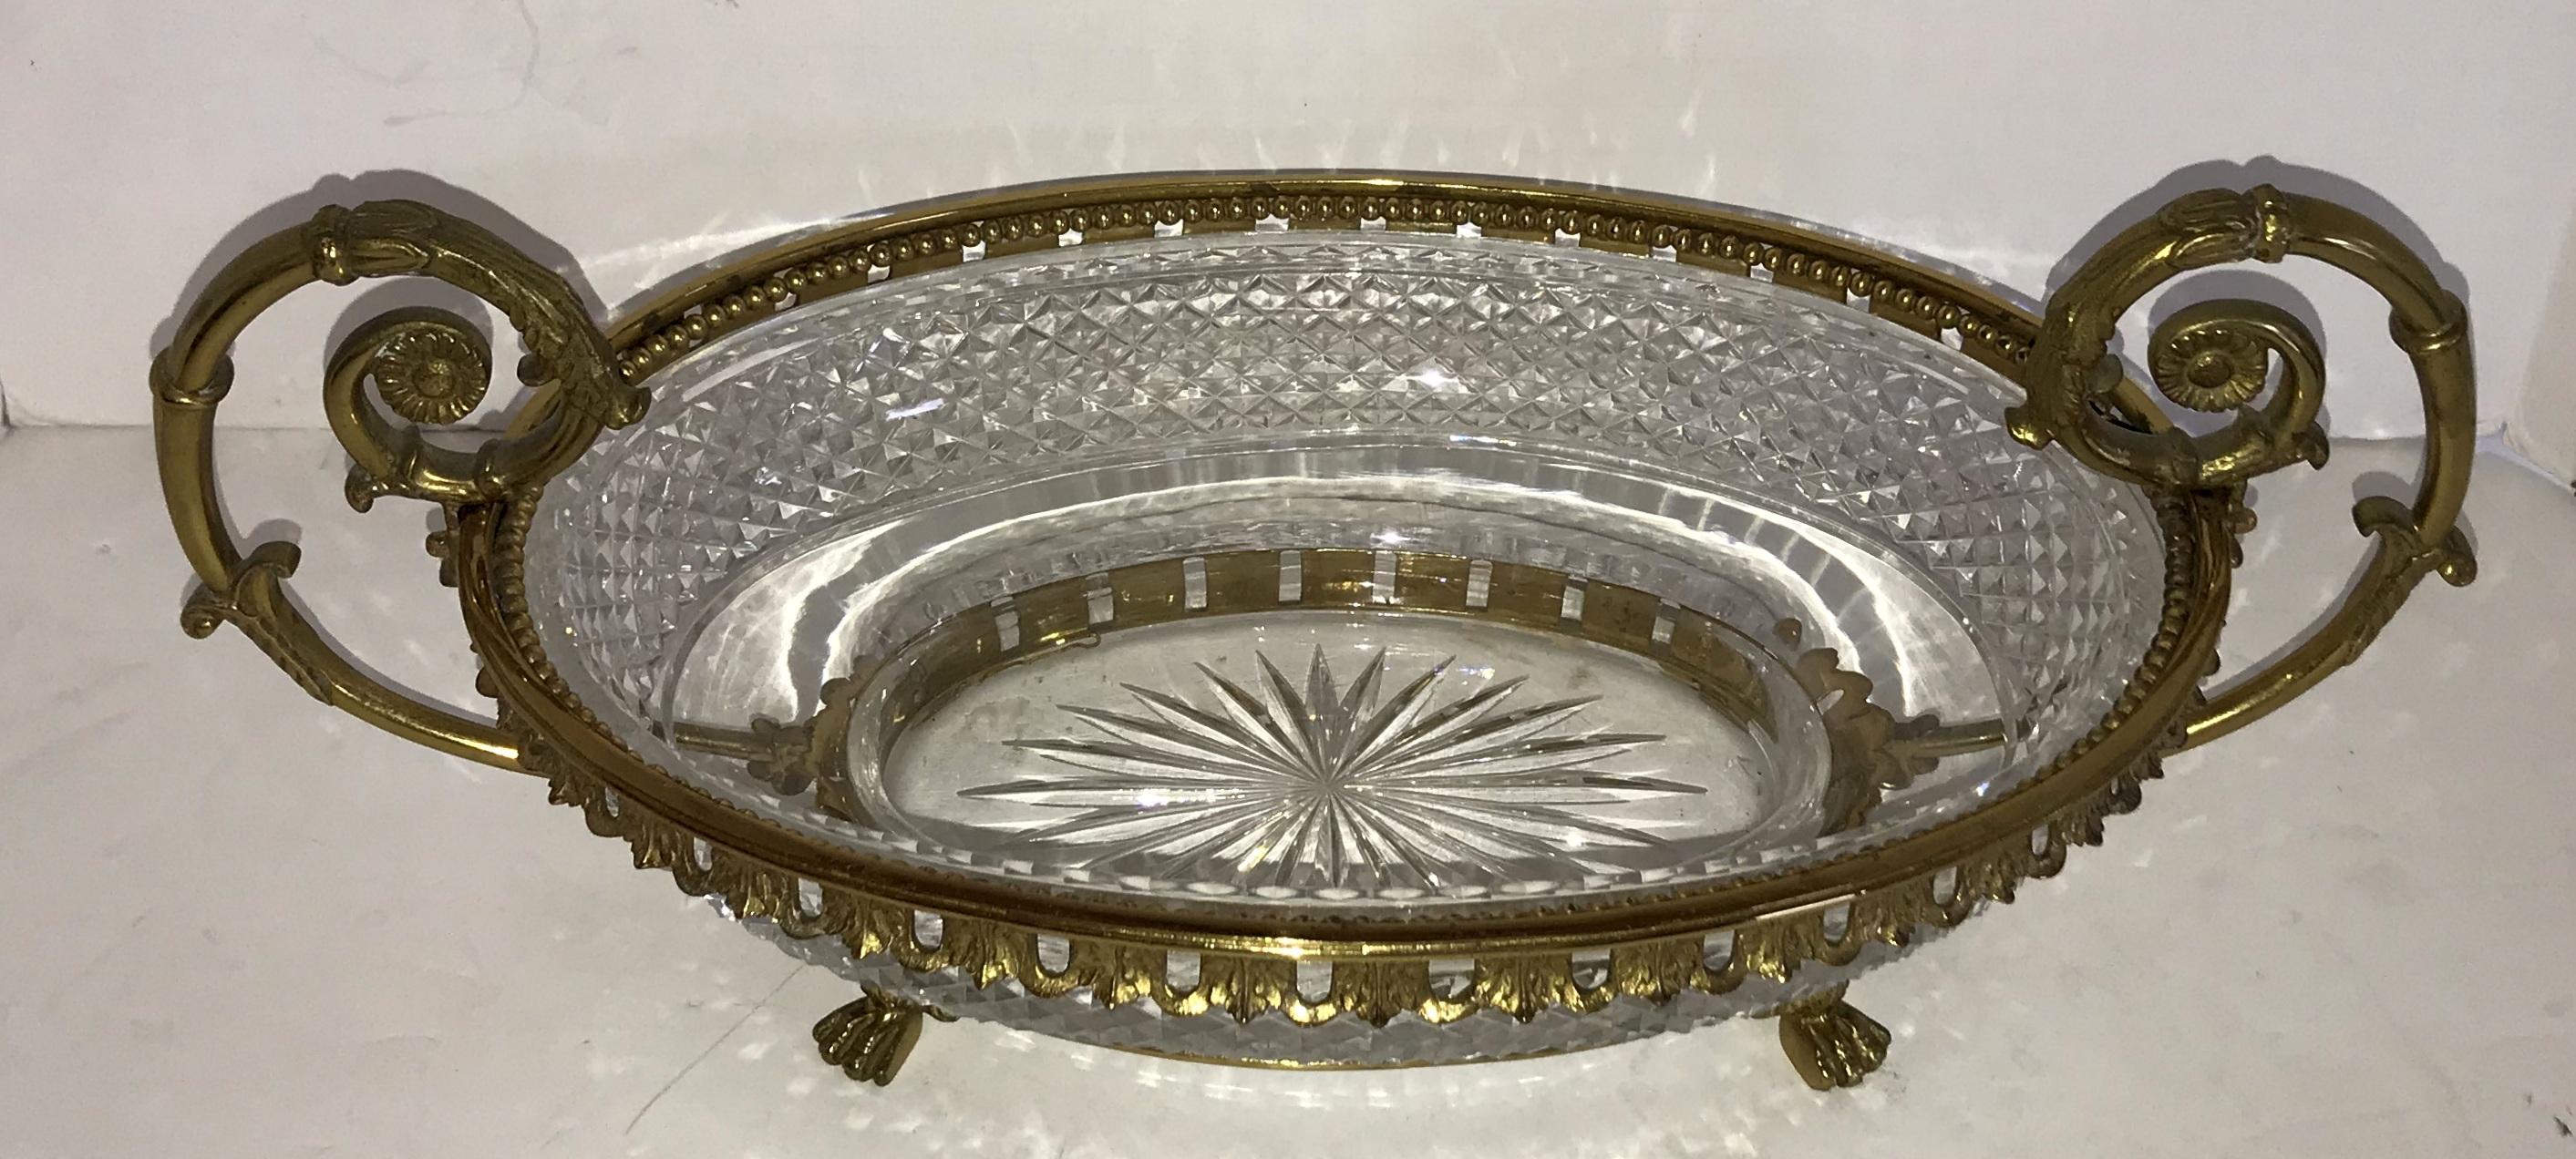 Wonderful large oval French neoclassical ormolu doré bronze and diamond cut crystal oval centerpiece / Jardinière with lions feet and double handles.

Measures: 17.5